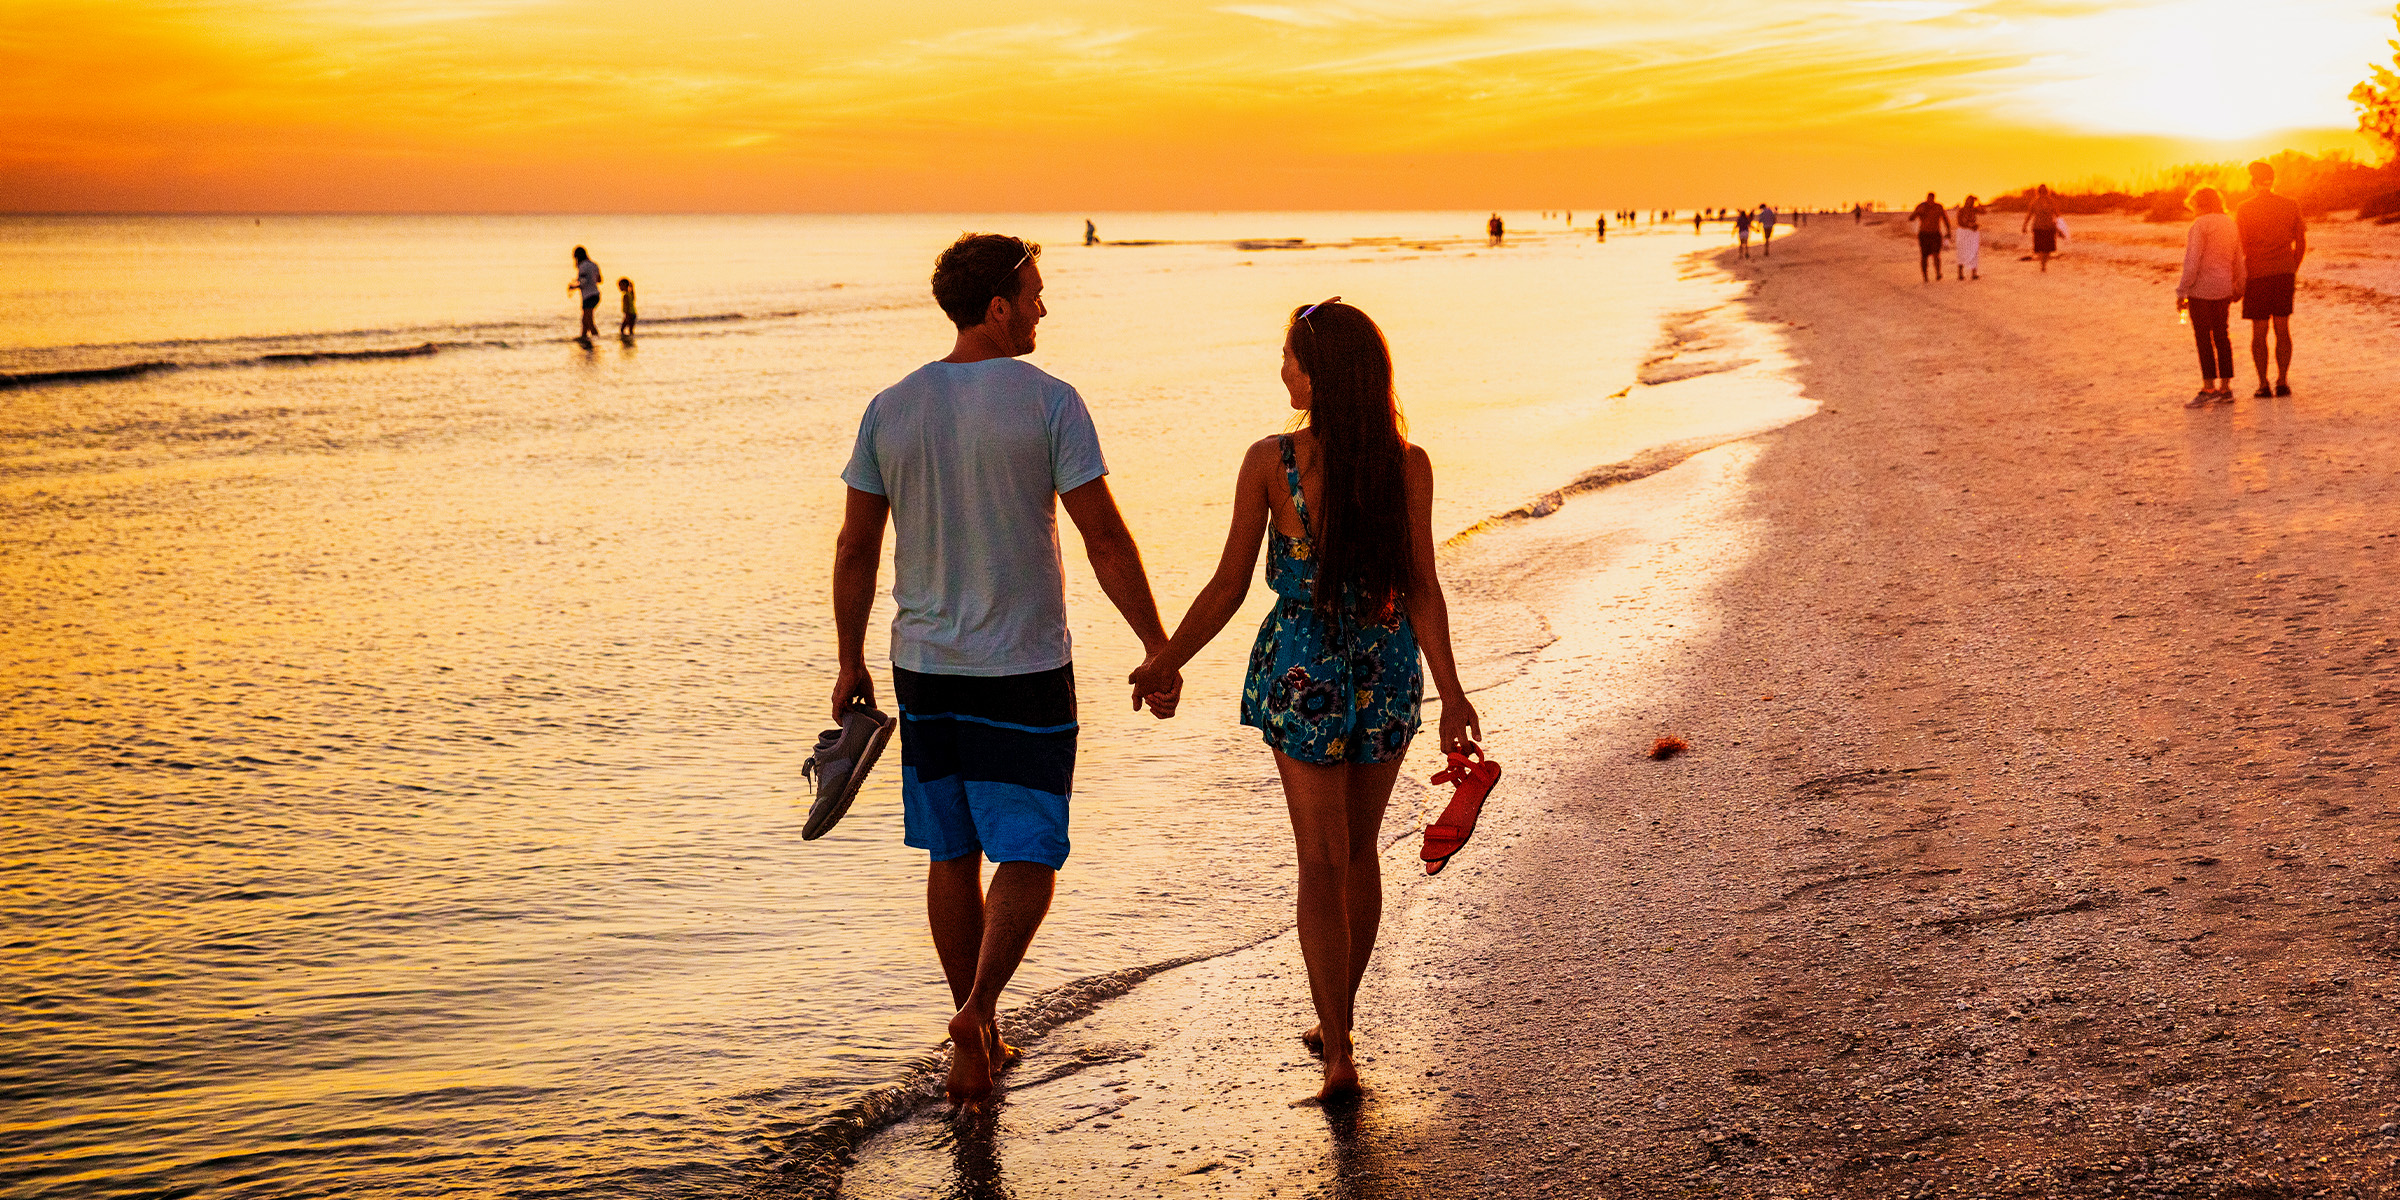 Couple spending quality time at the beach | Source: Shutterstock